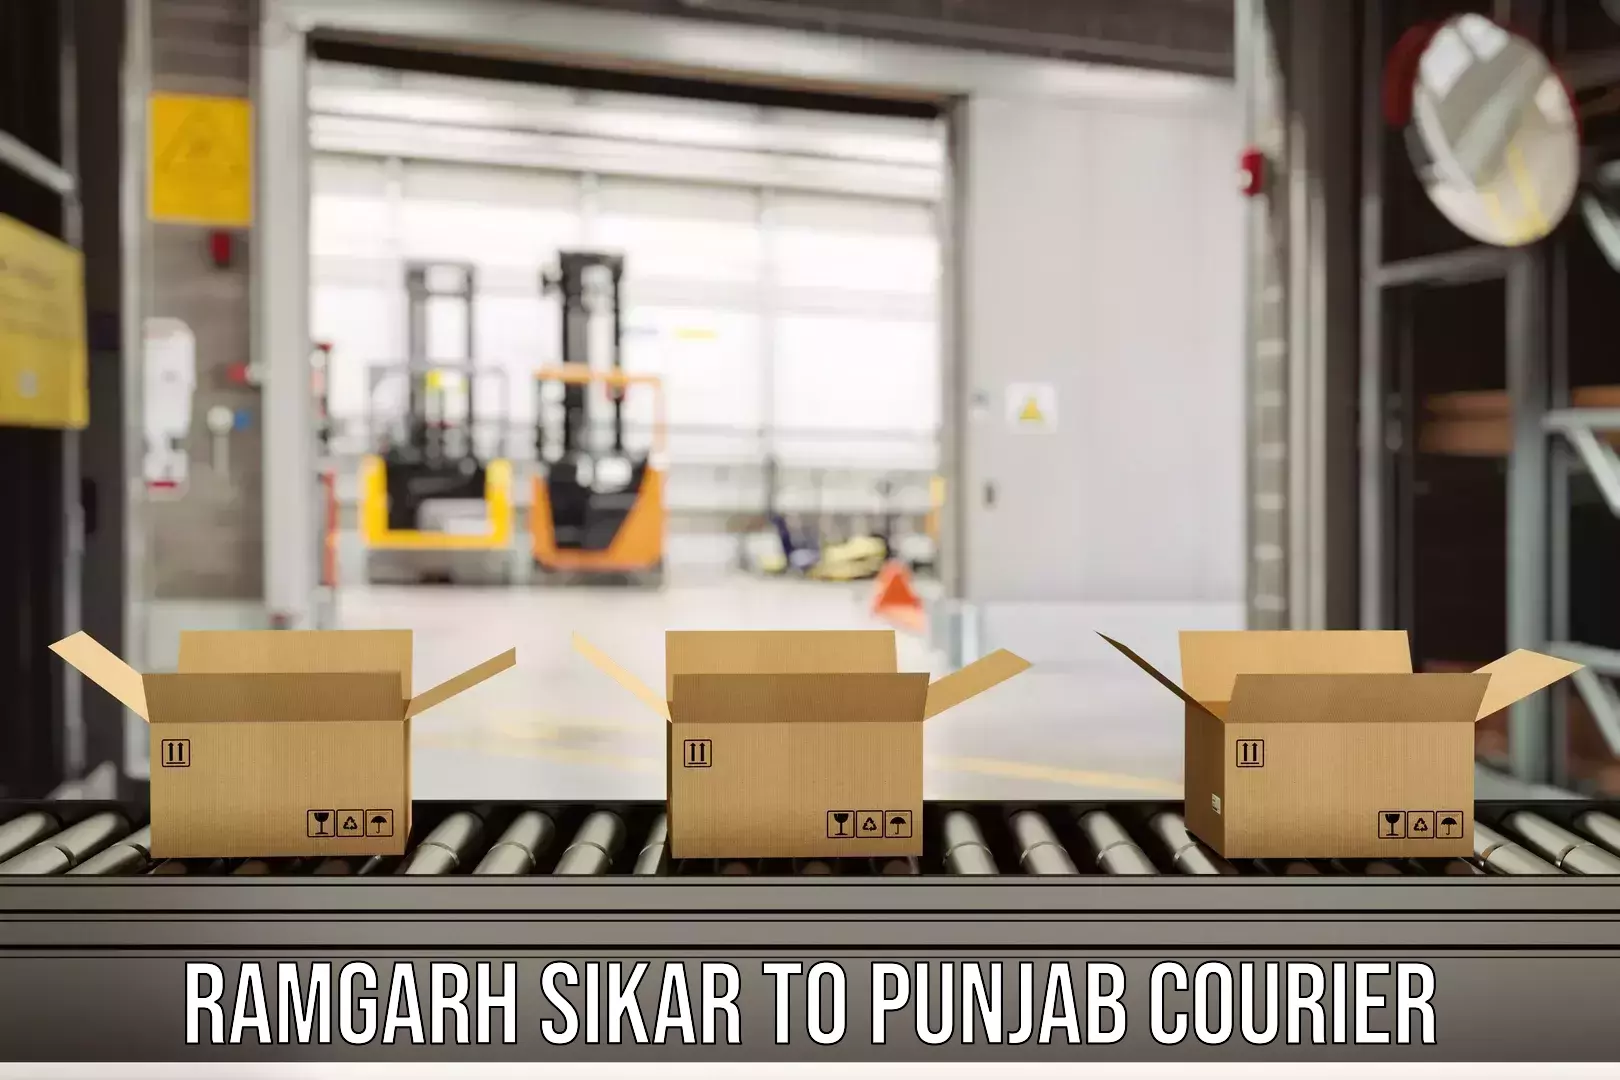 Express delivery network Ramgarh Sikar to Punjab